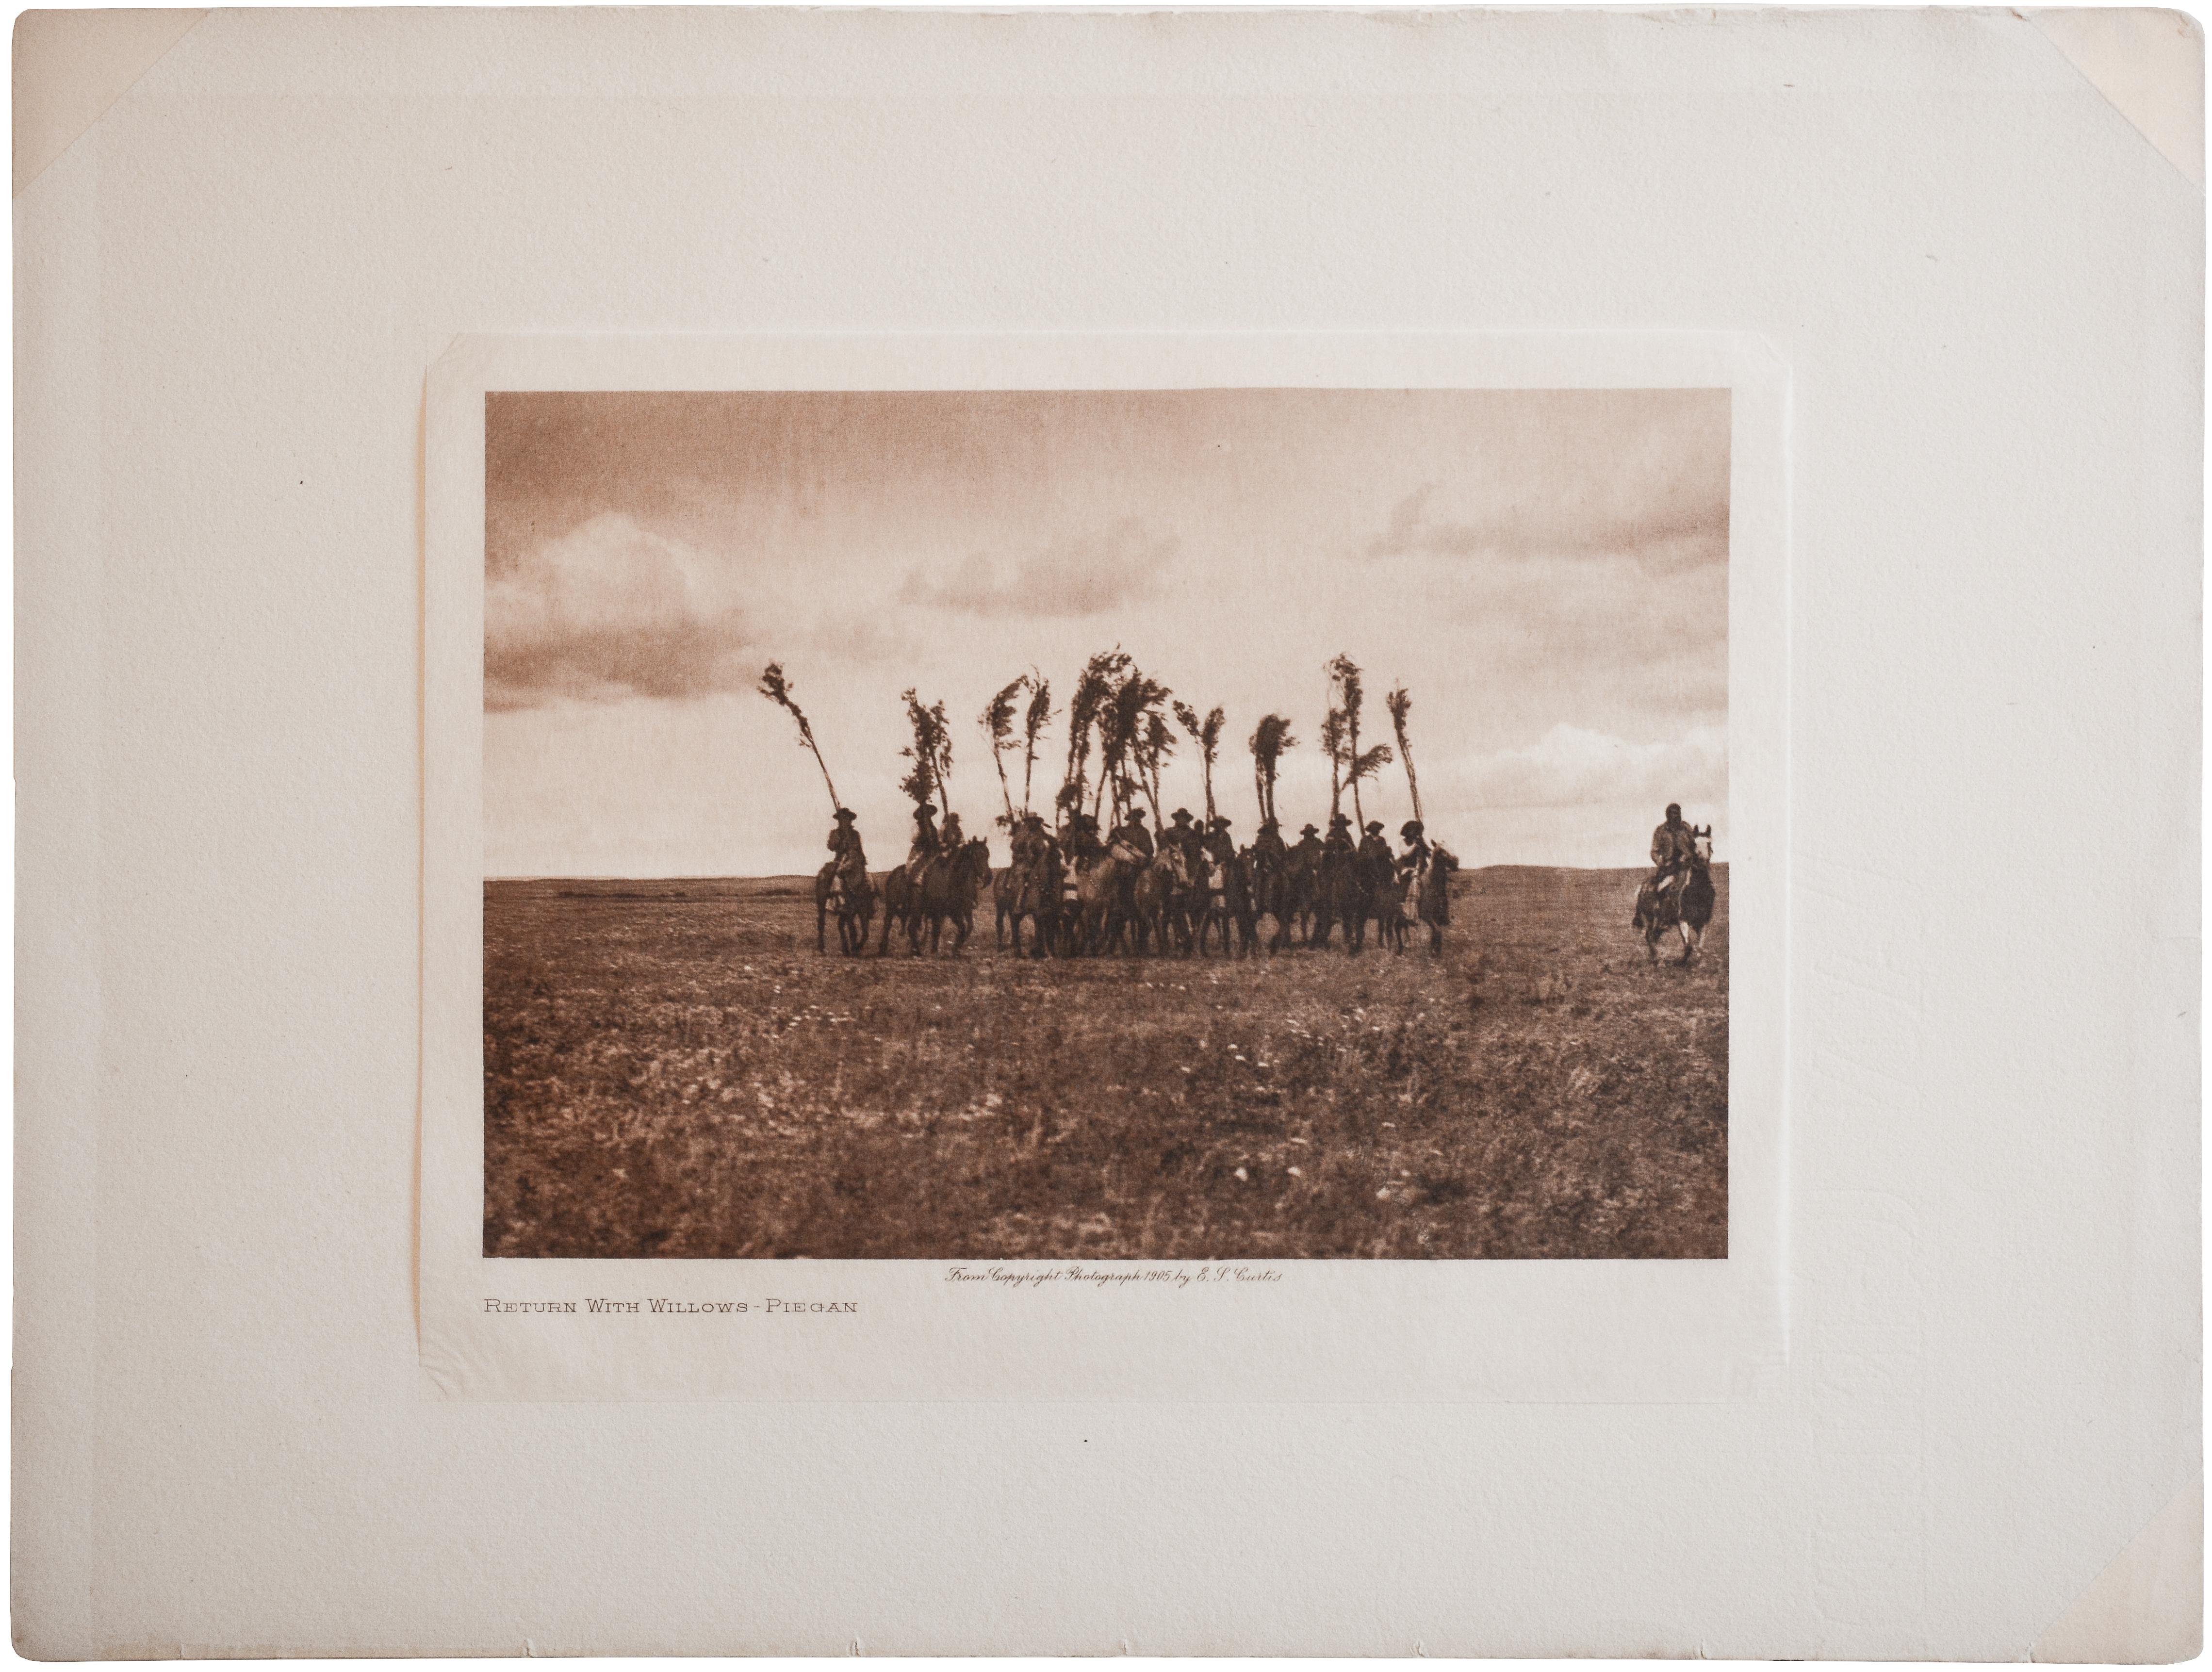 Return With The Willows - Piegan, 1910 - Photograph by Edward S. Curtis